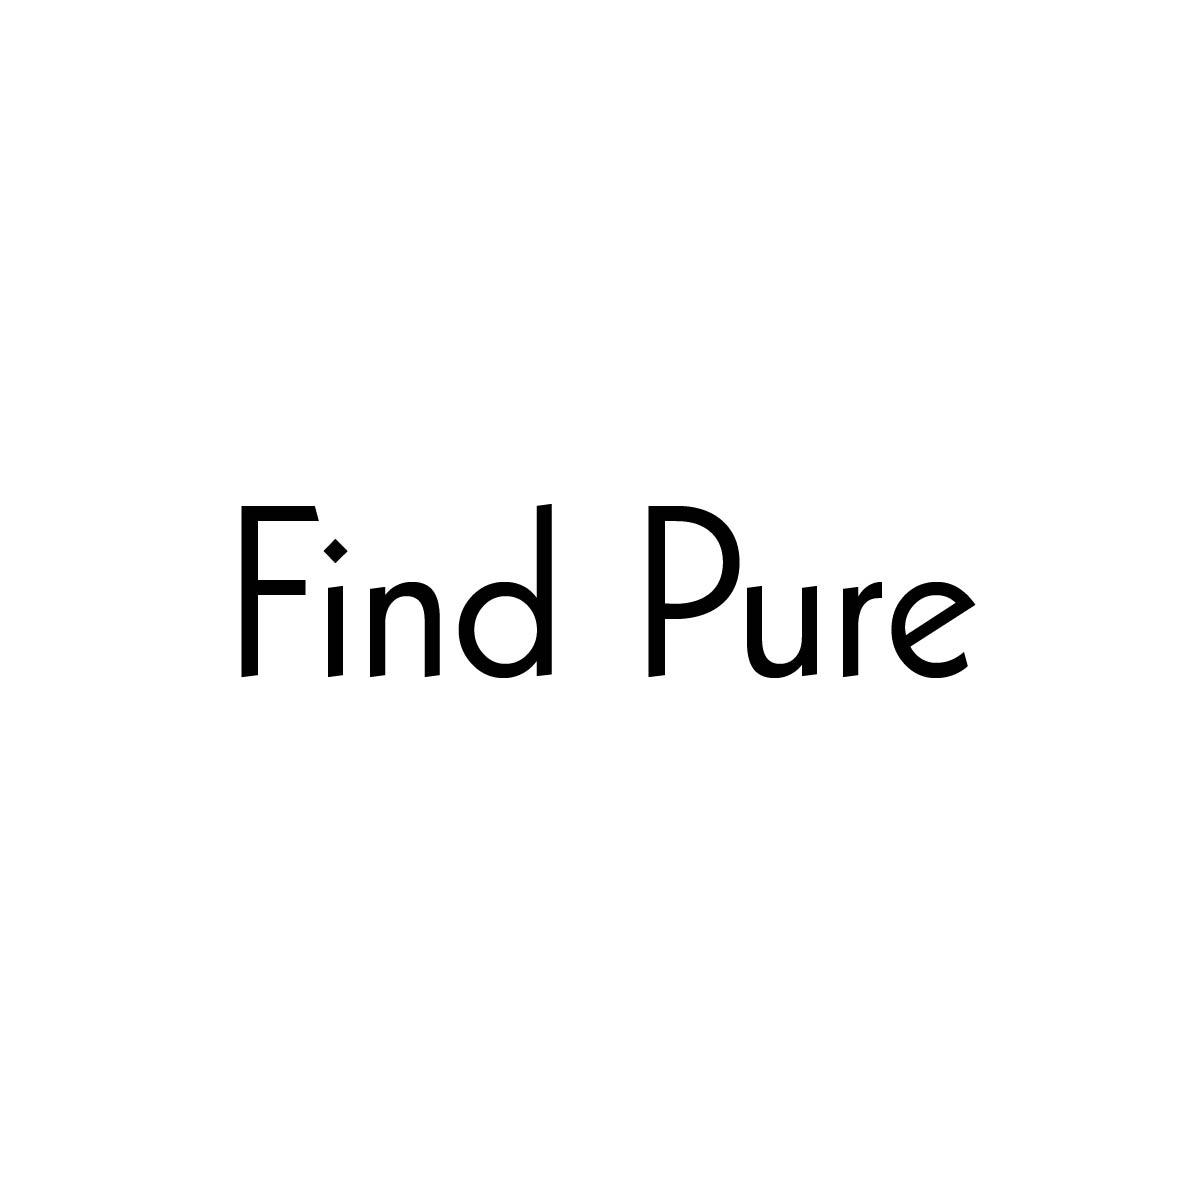 FIND PURE